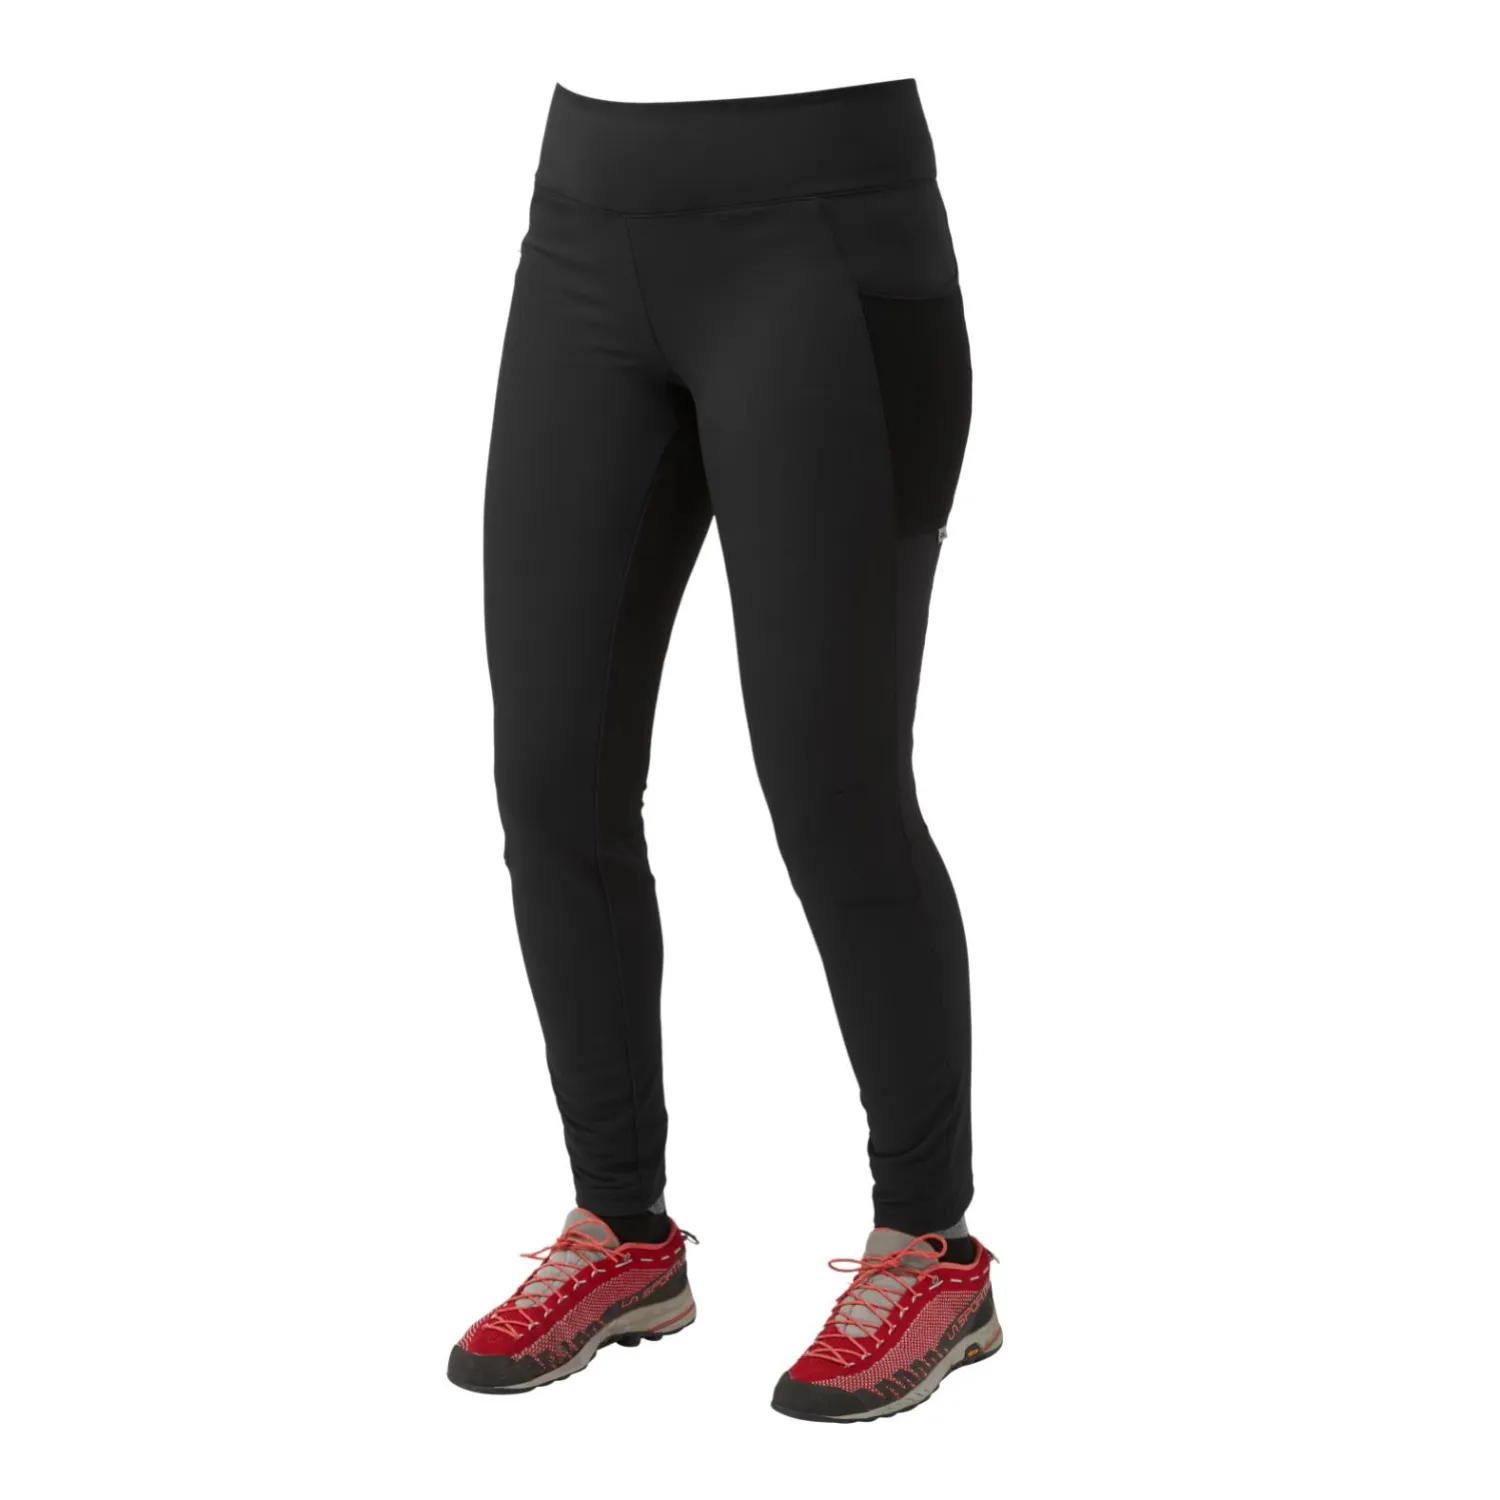 ME_Sonica Wmns Tight_Black_Front.jpg